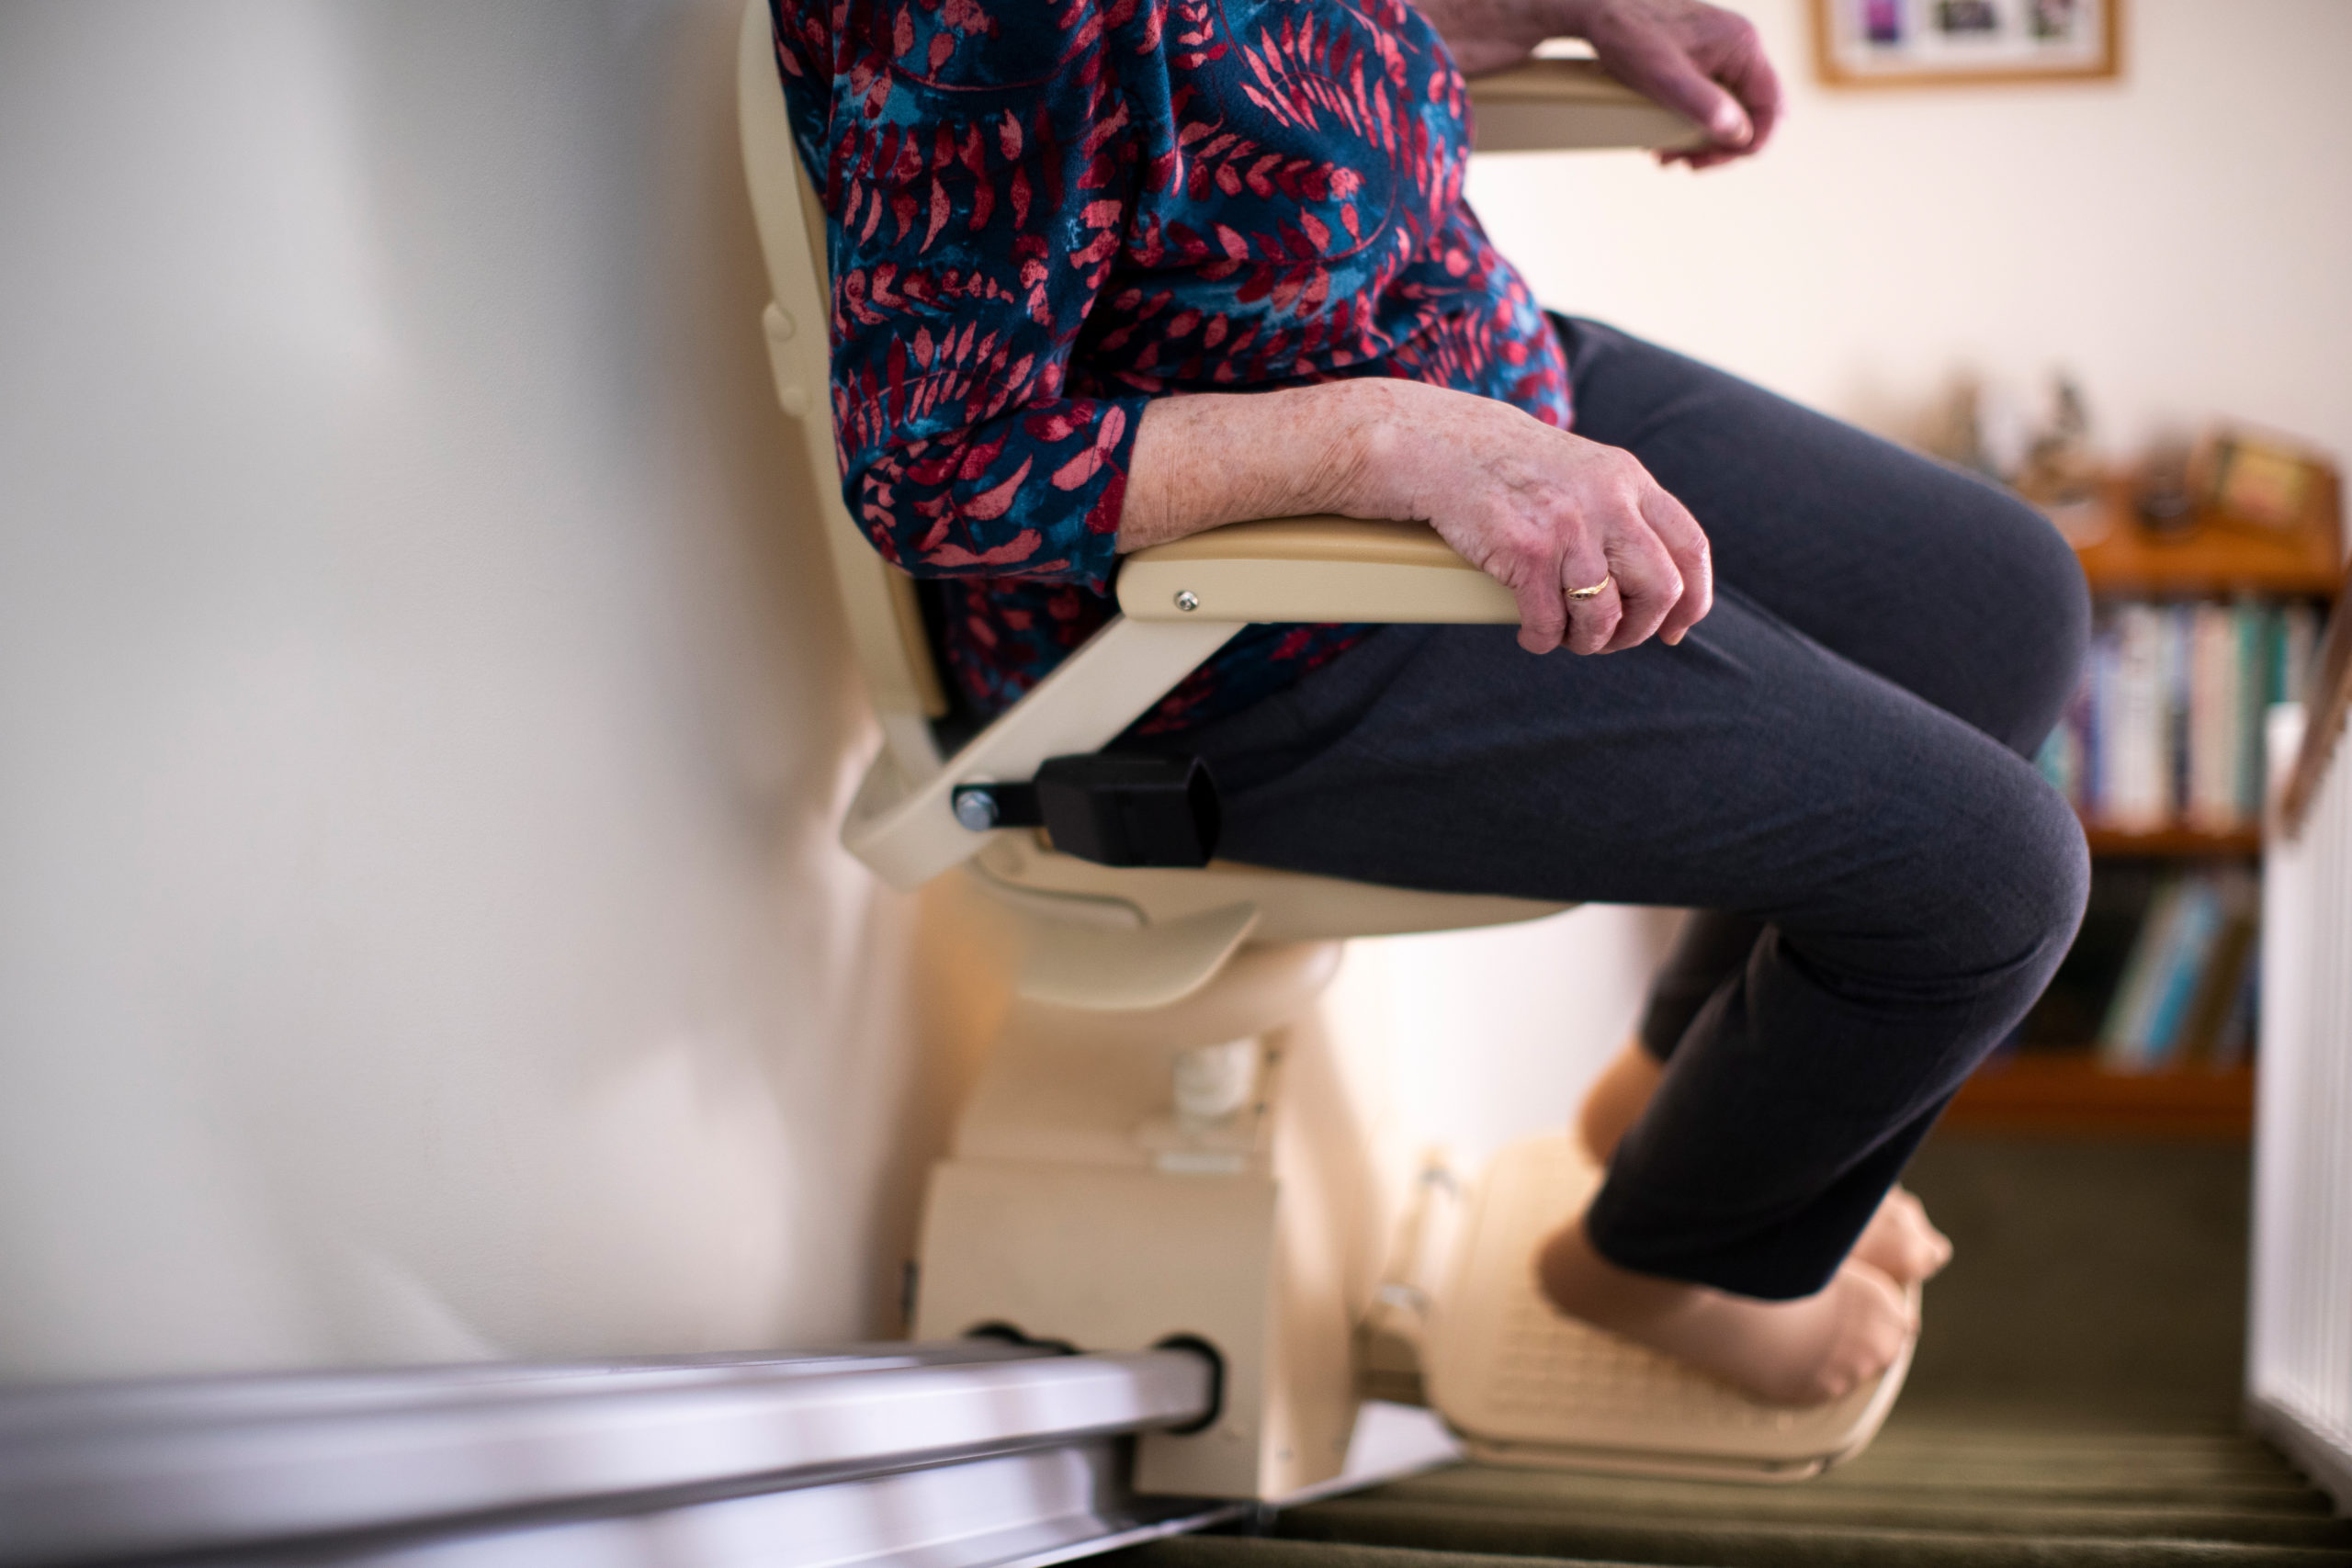 How Much Does a Stairlift Cost? Our Complete Guide to Stairlift Options & Pricing